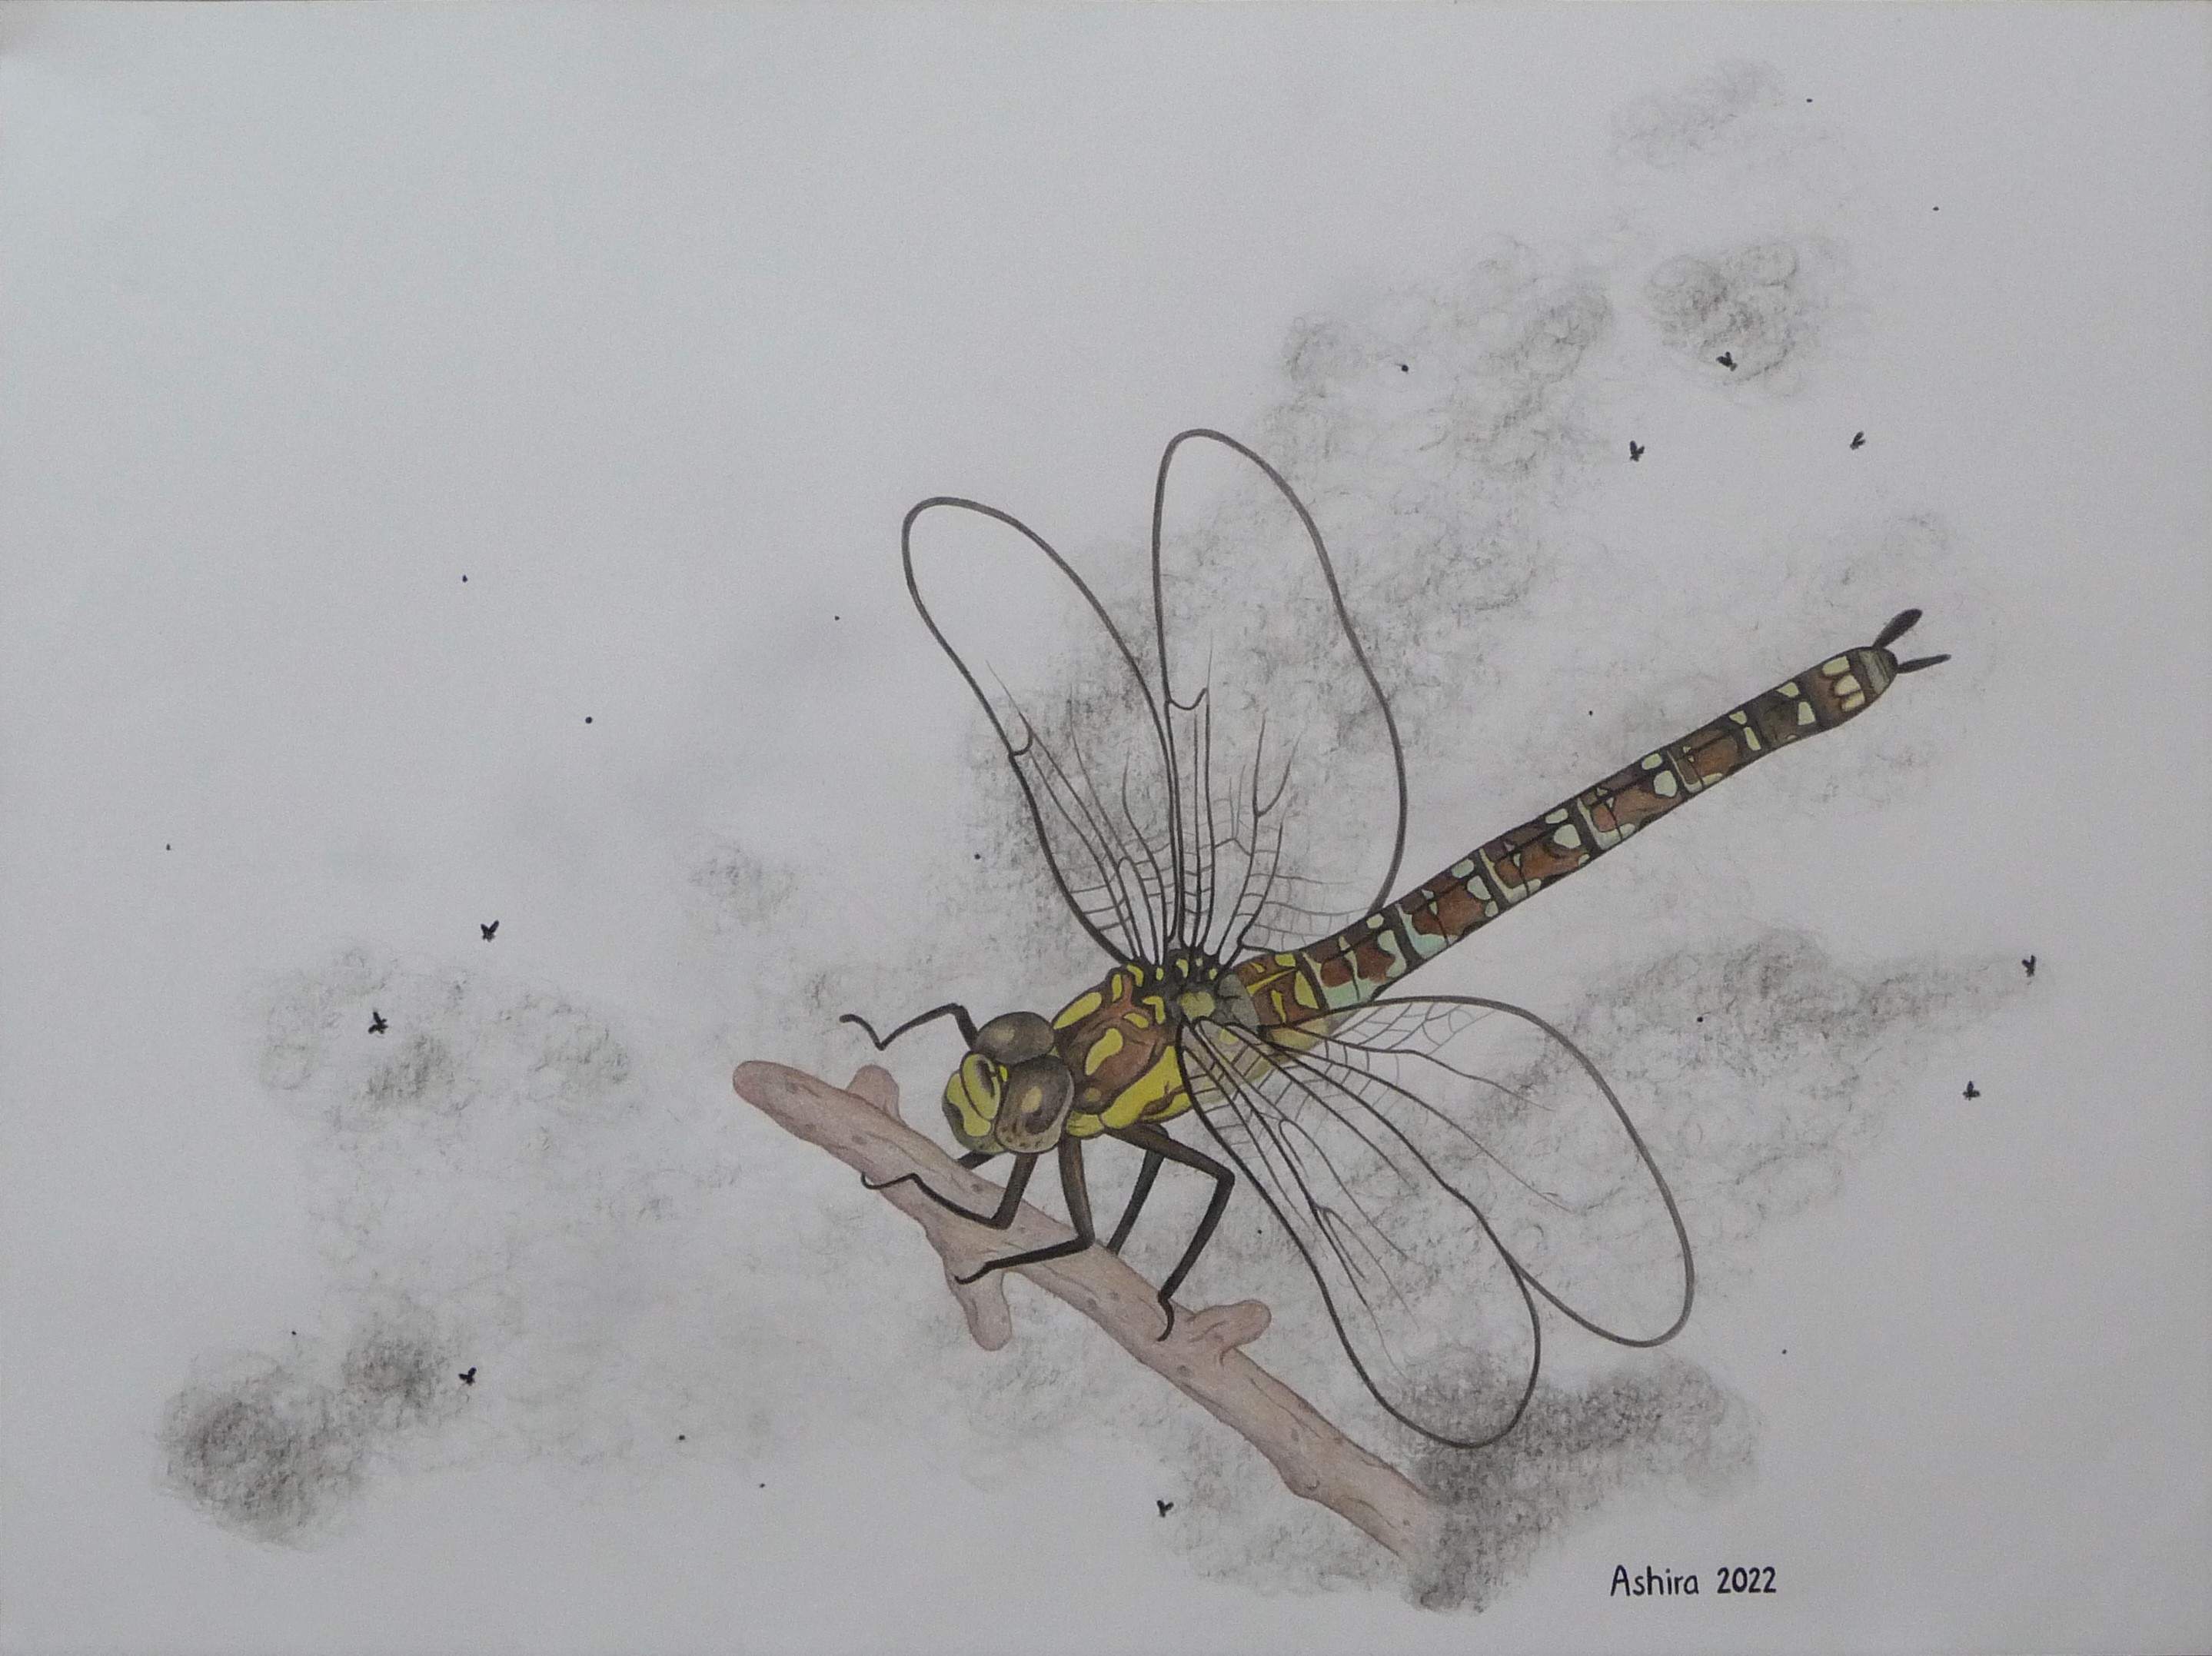 moorland hawker dragonfly ♀ - july 2022, colour pencil + charcoal on paper, 42x57 cm